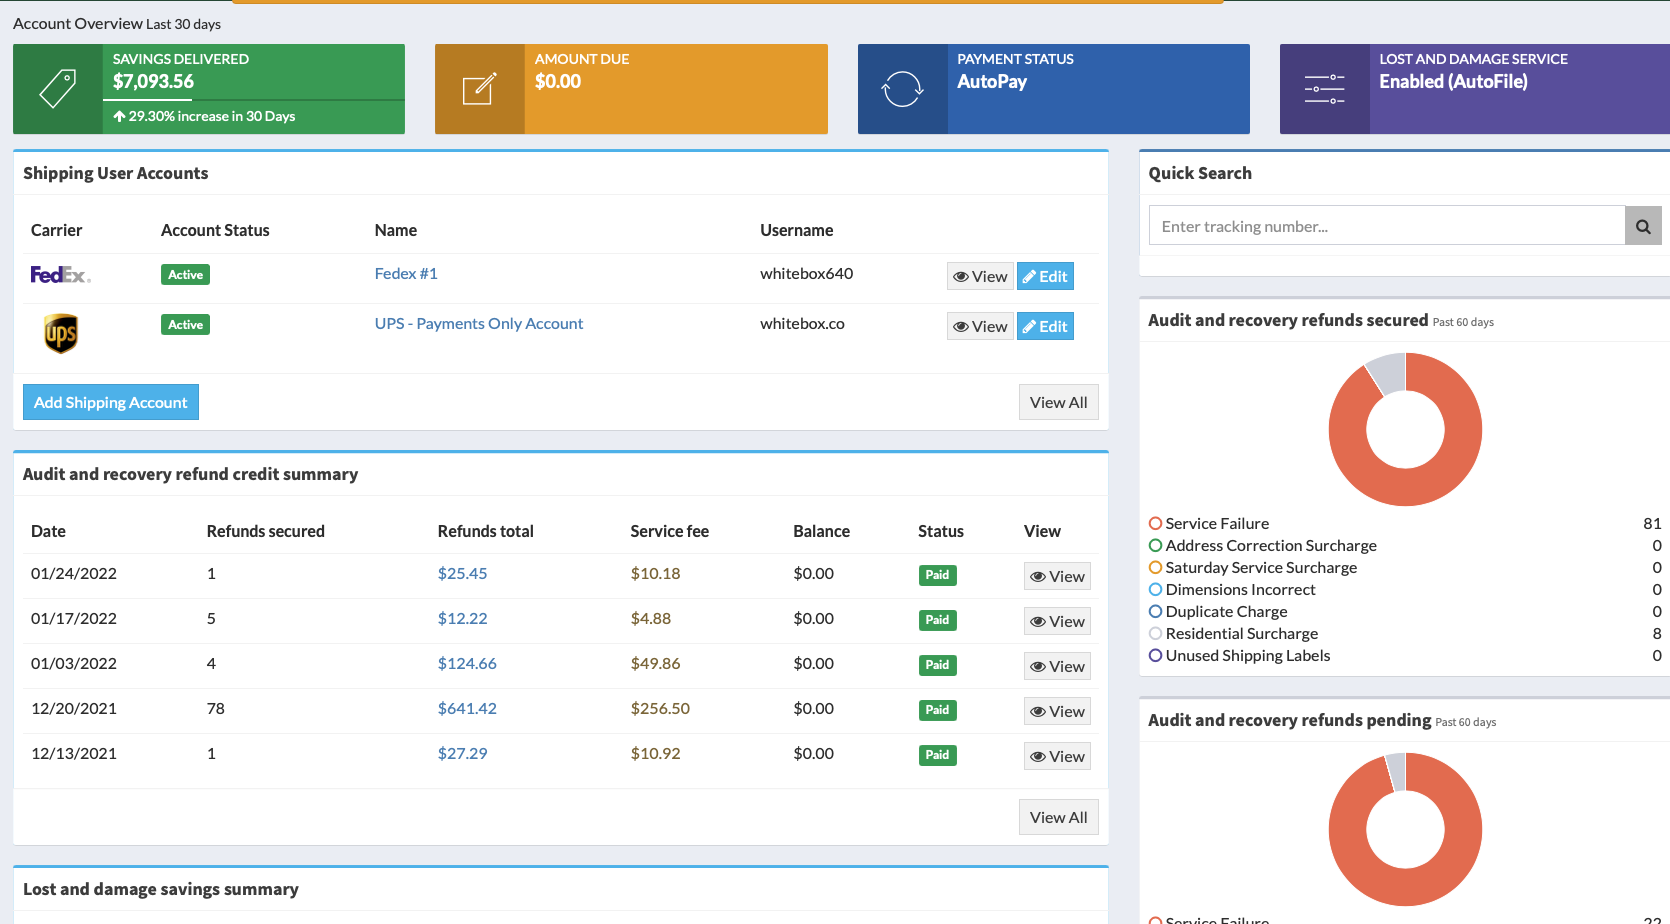 dashboards--account-overview